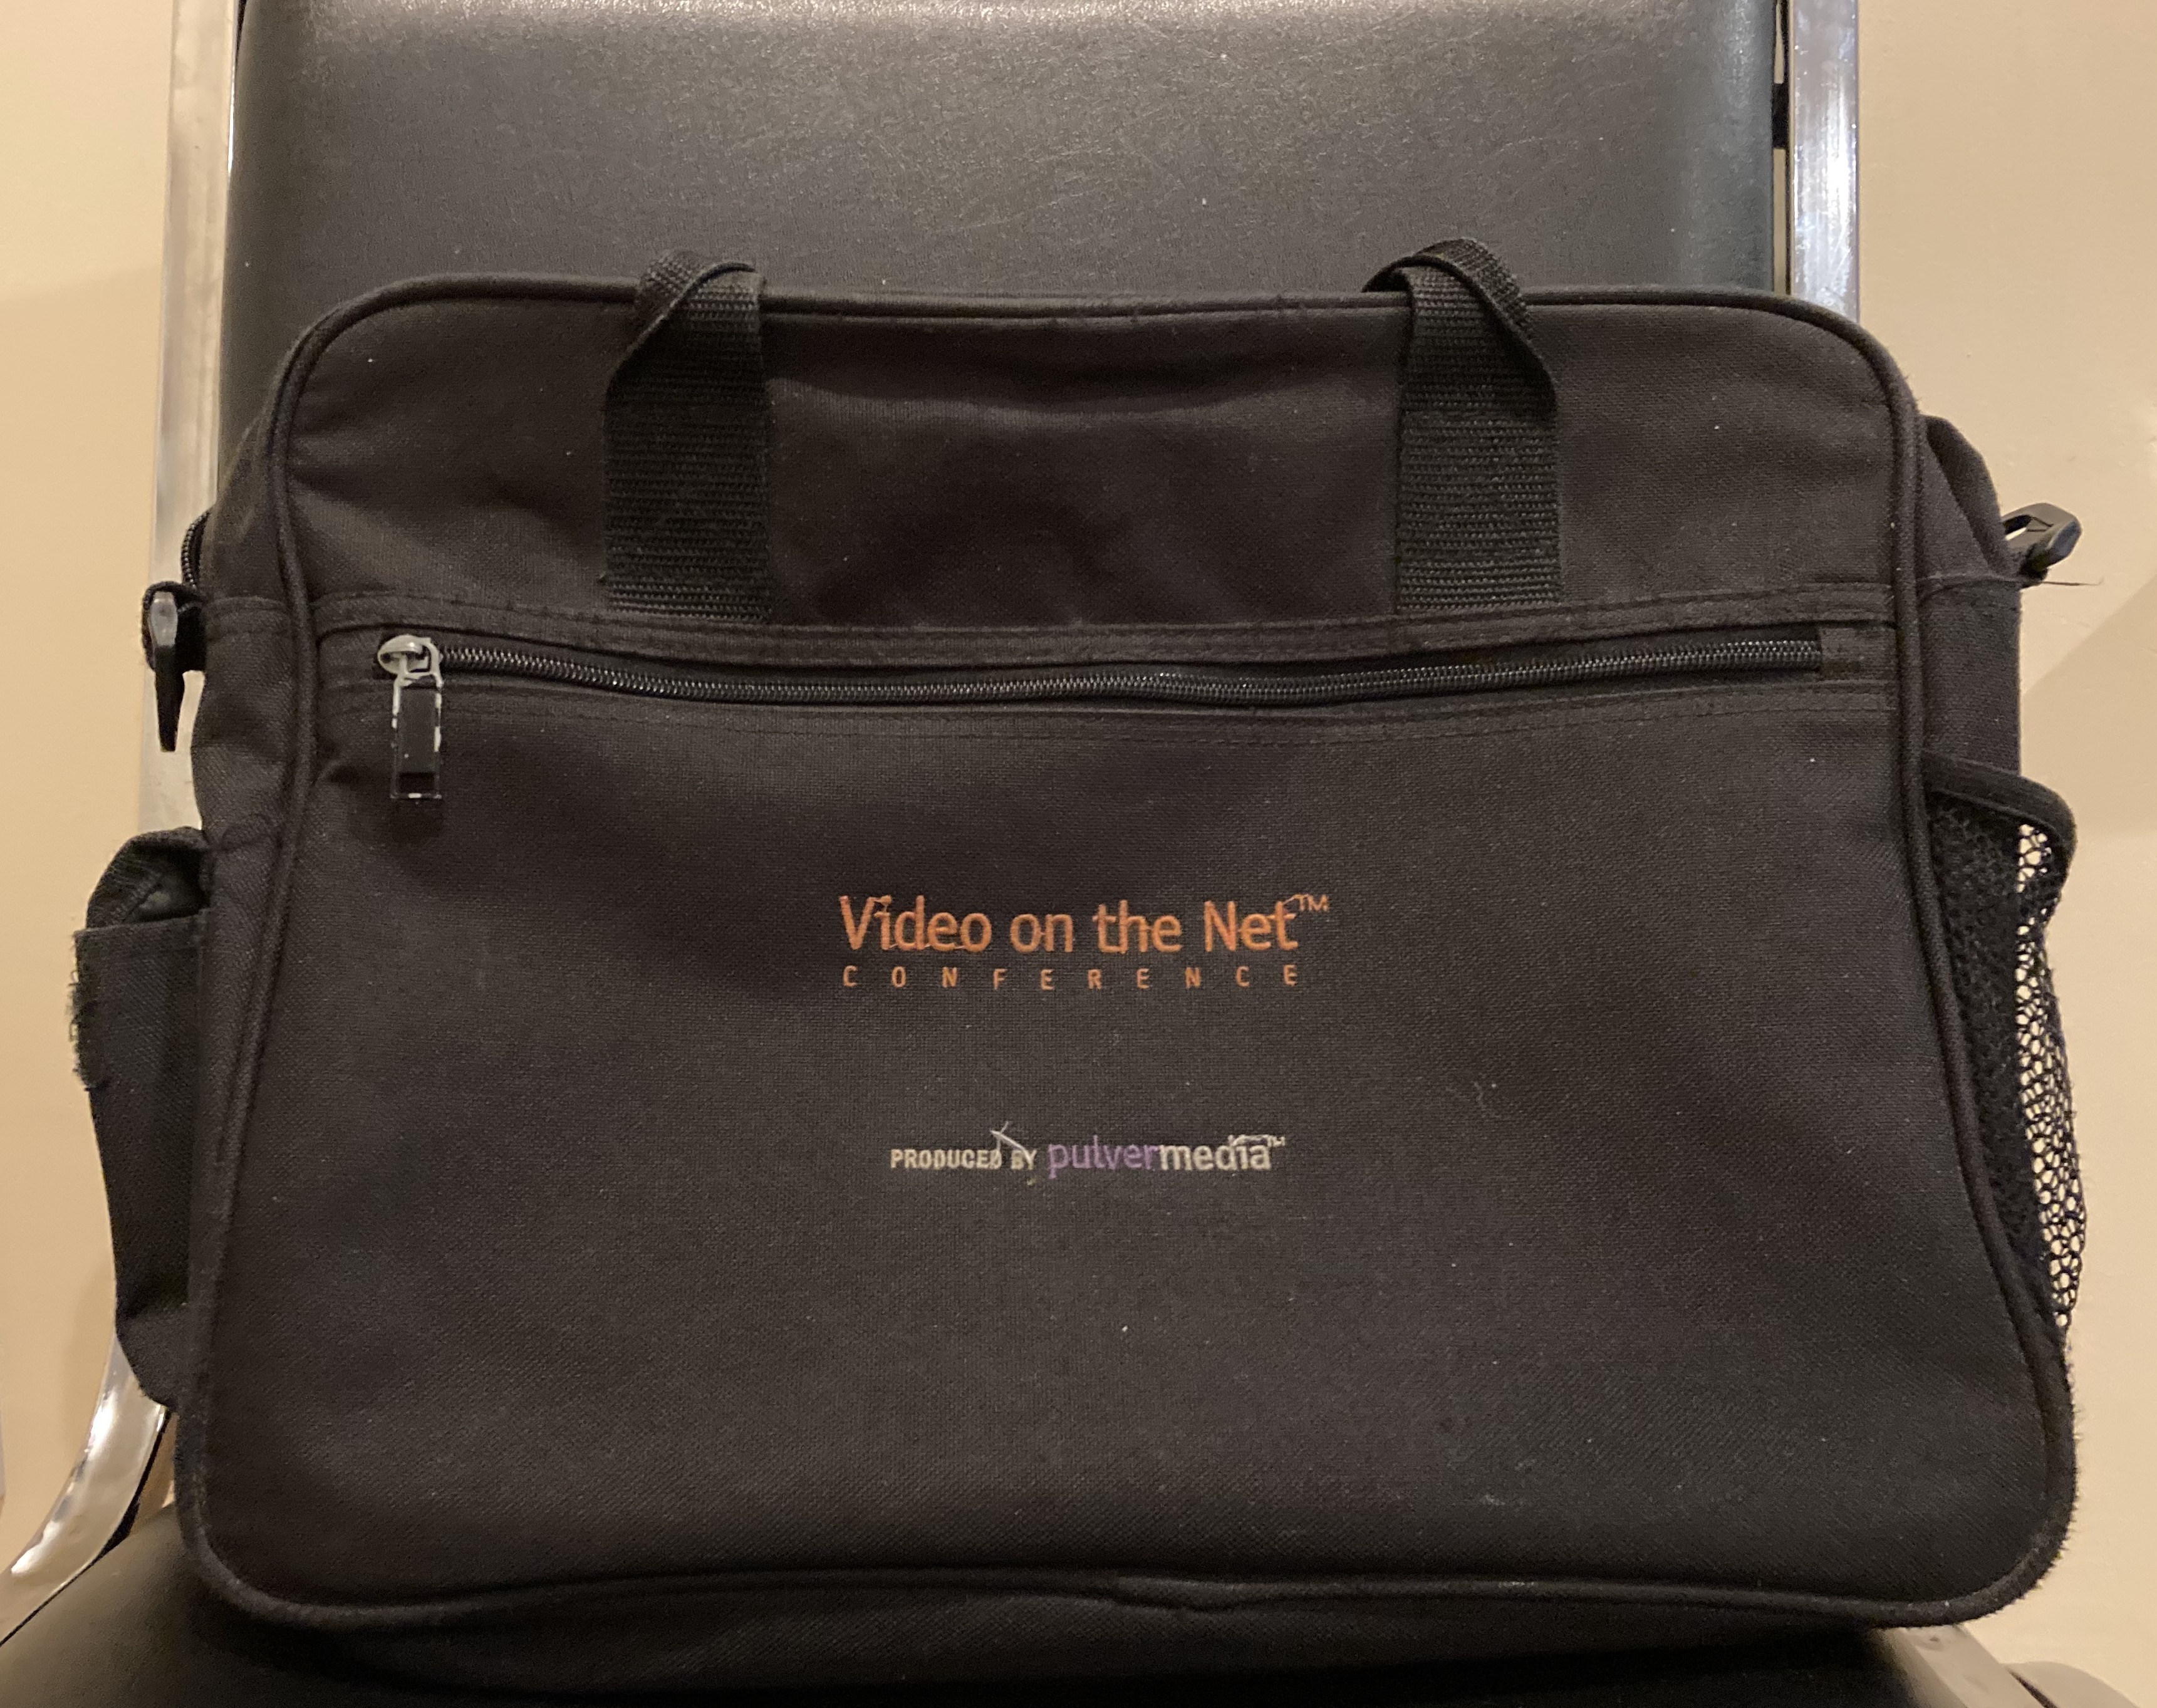 Photo of a laptop bag from the Video on the Net conference